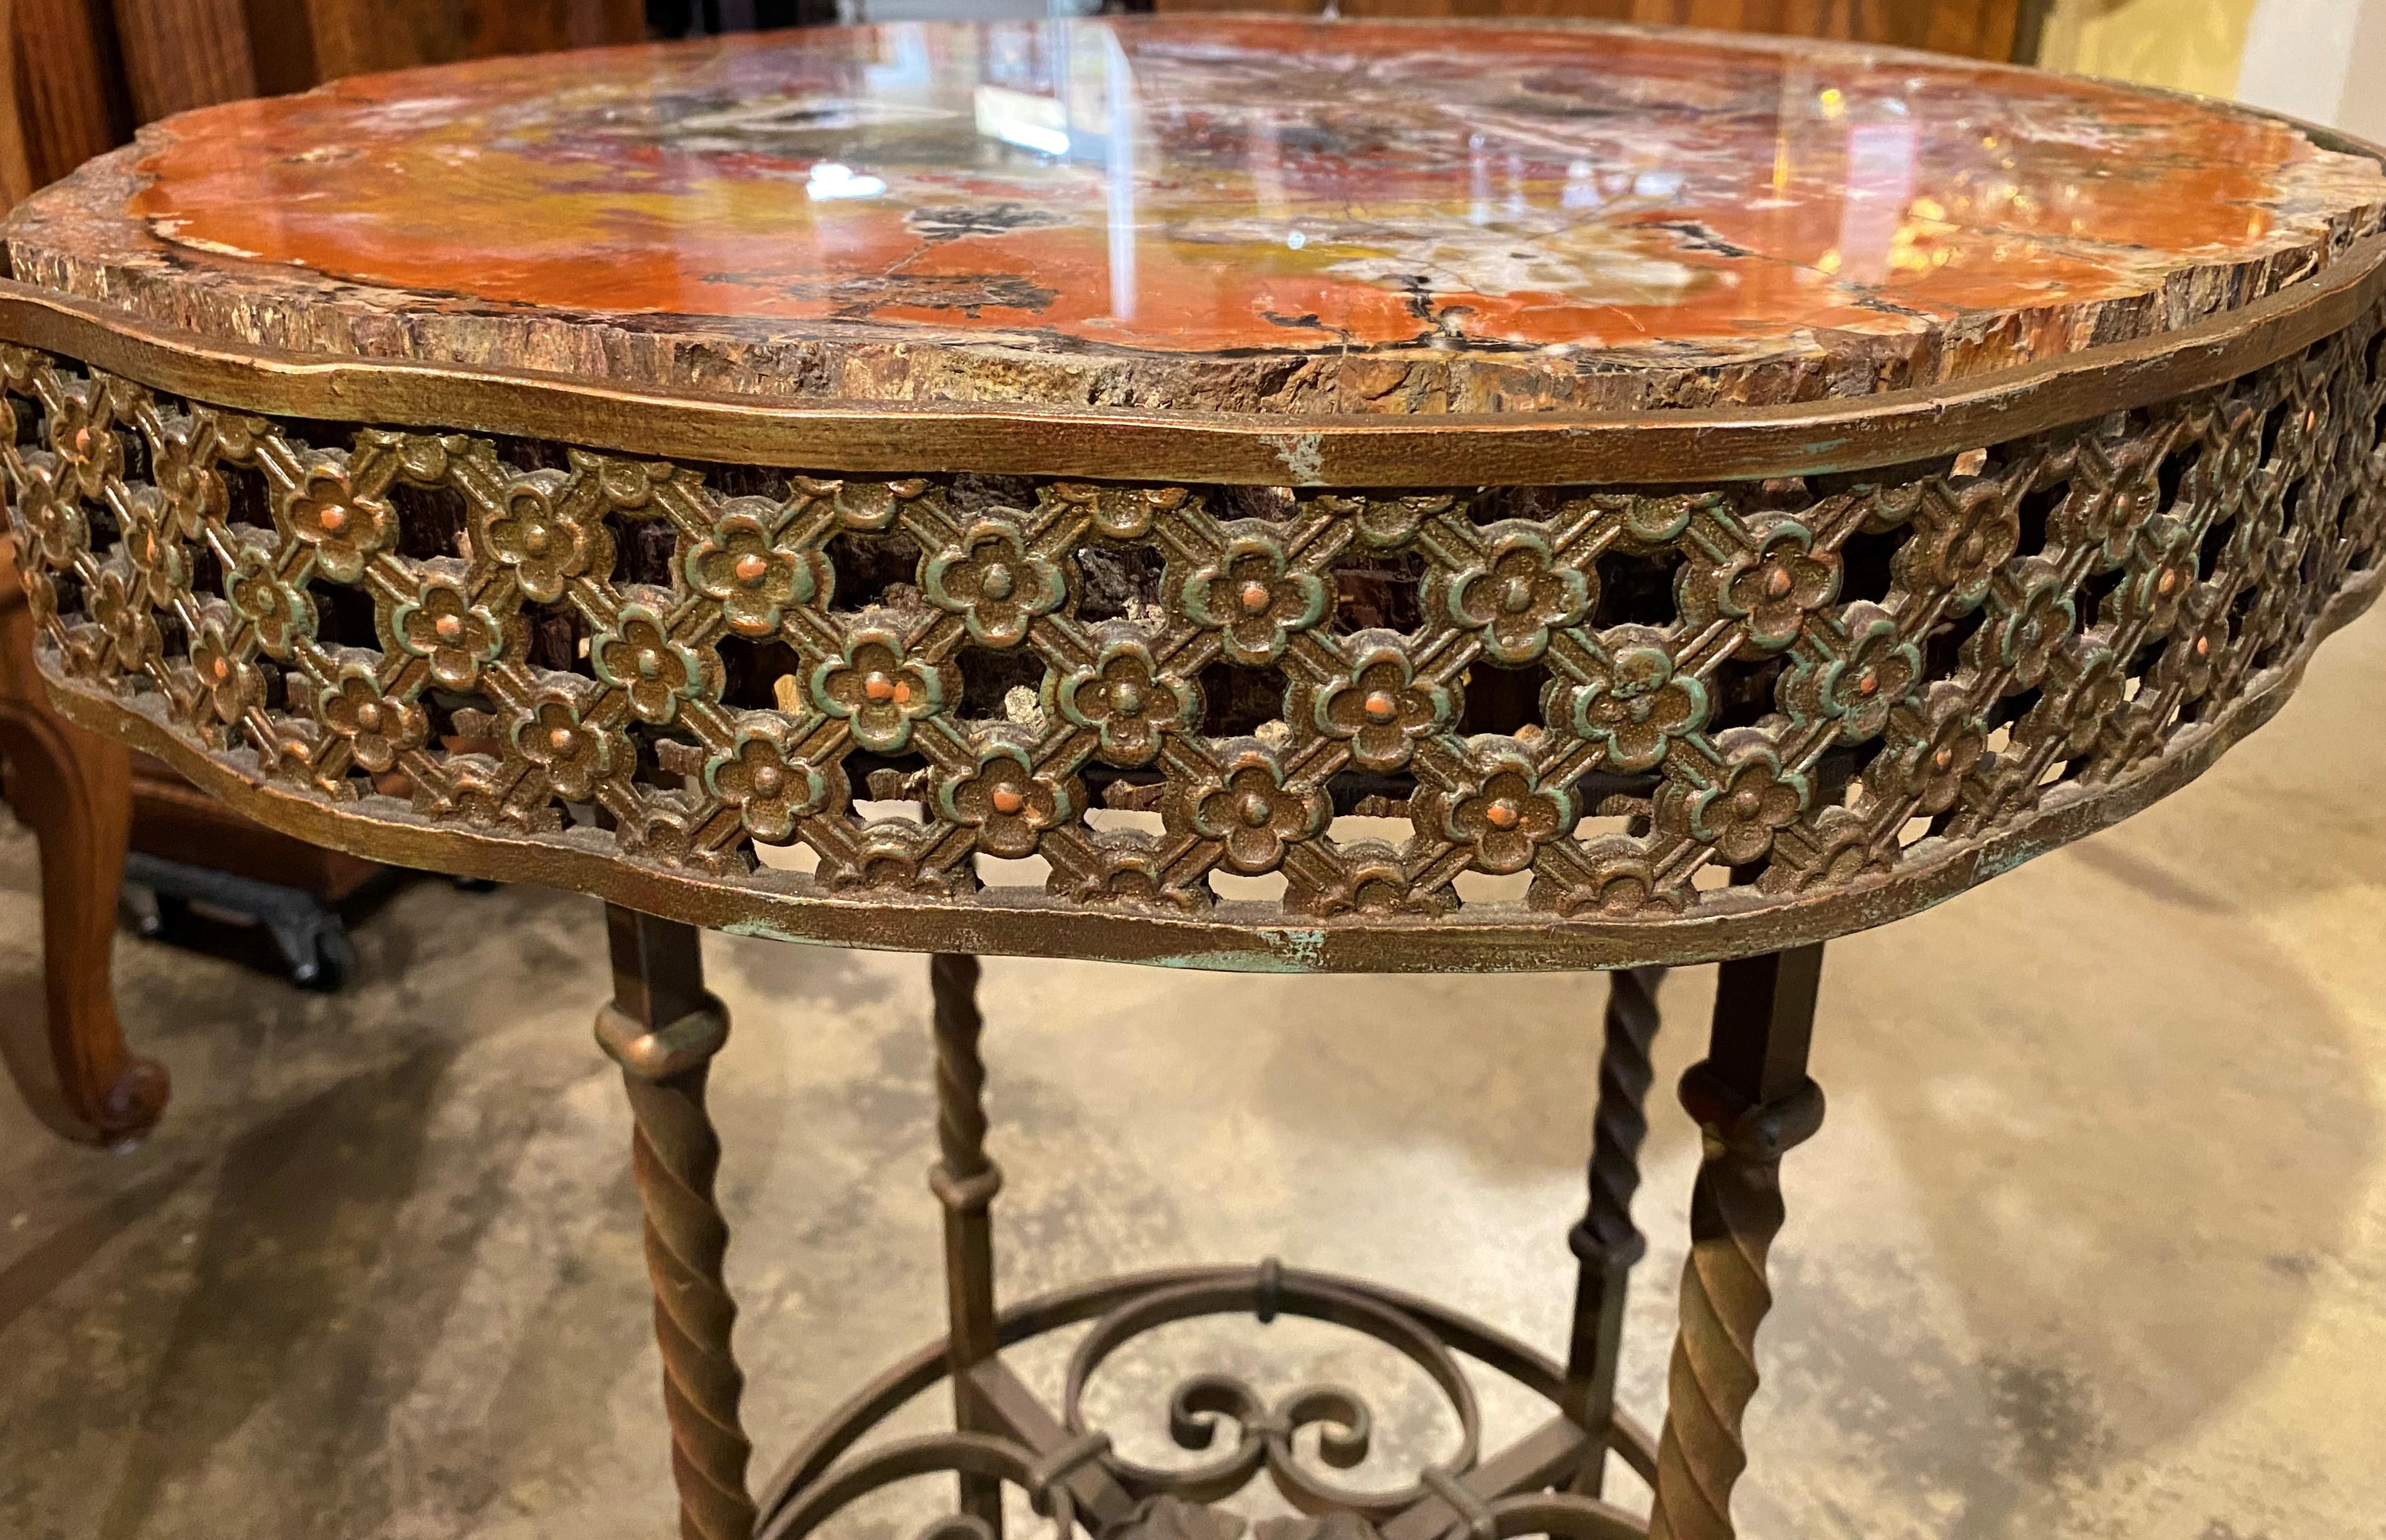 Patinated Unique Custom Bronze Scrollwork Side Table with Petrified Wood Top